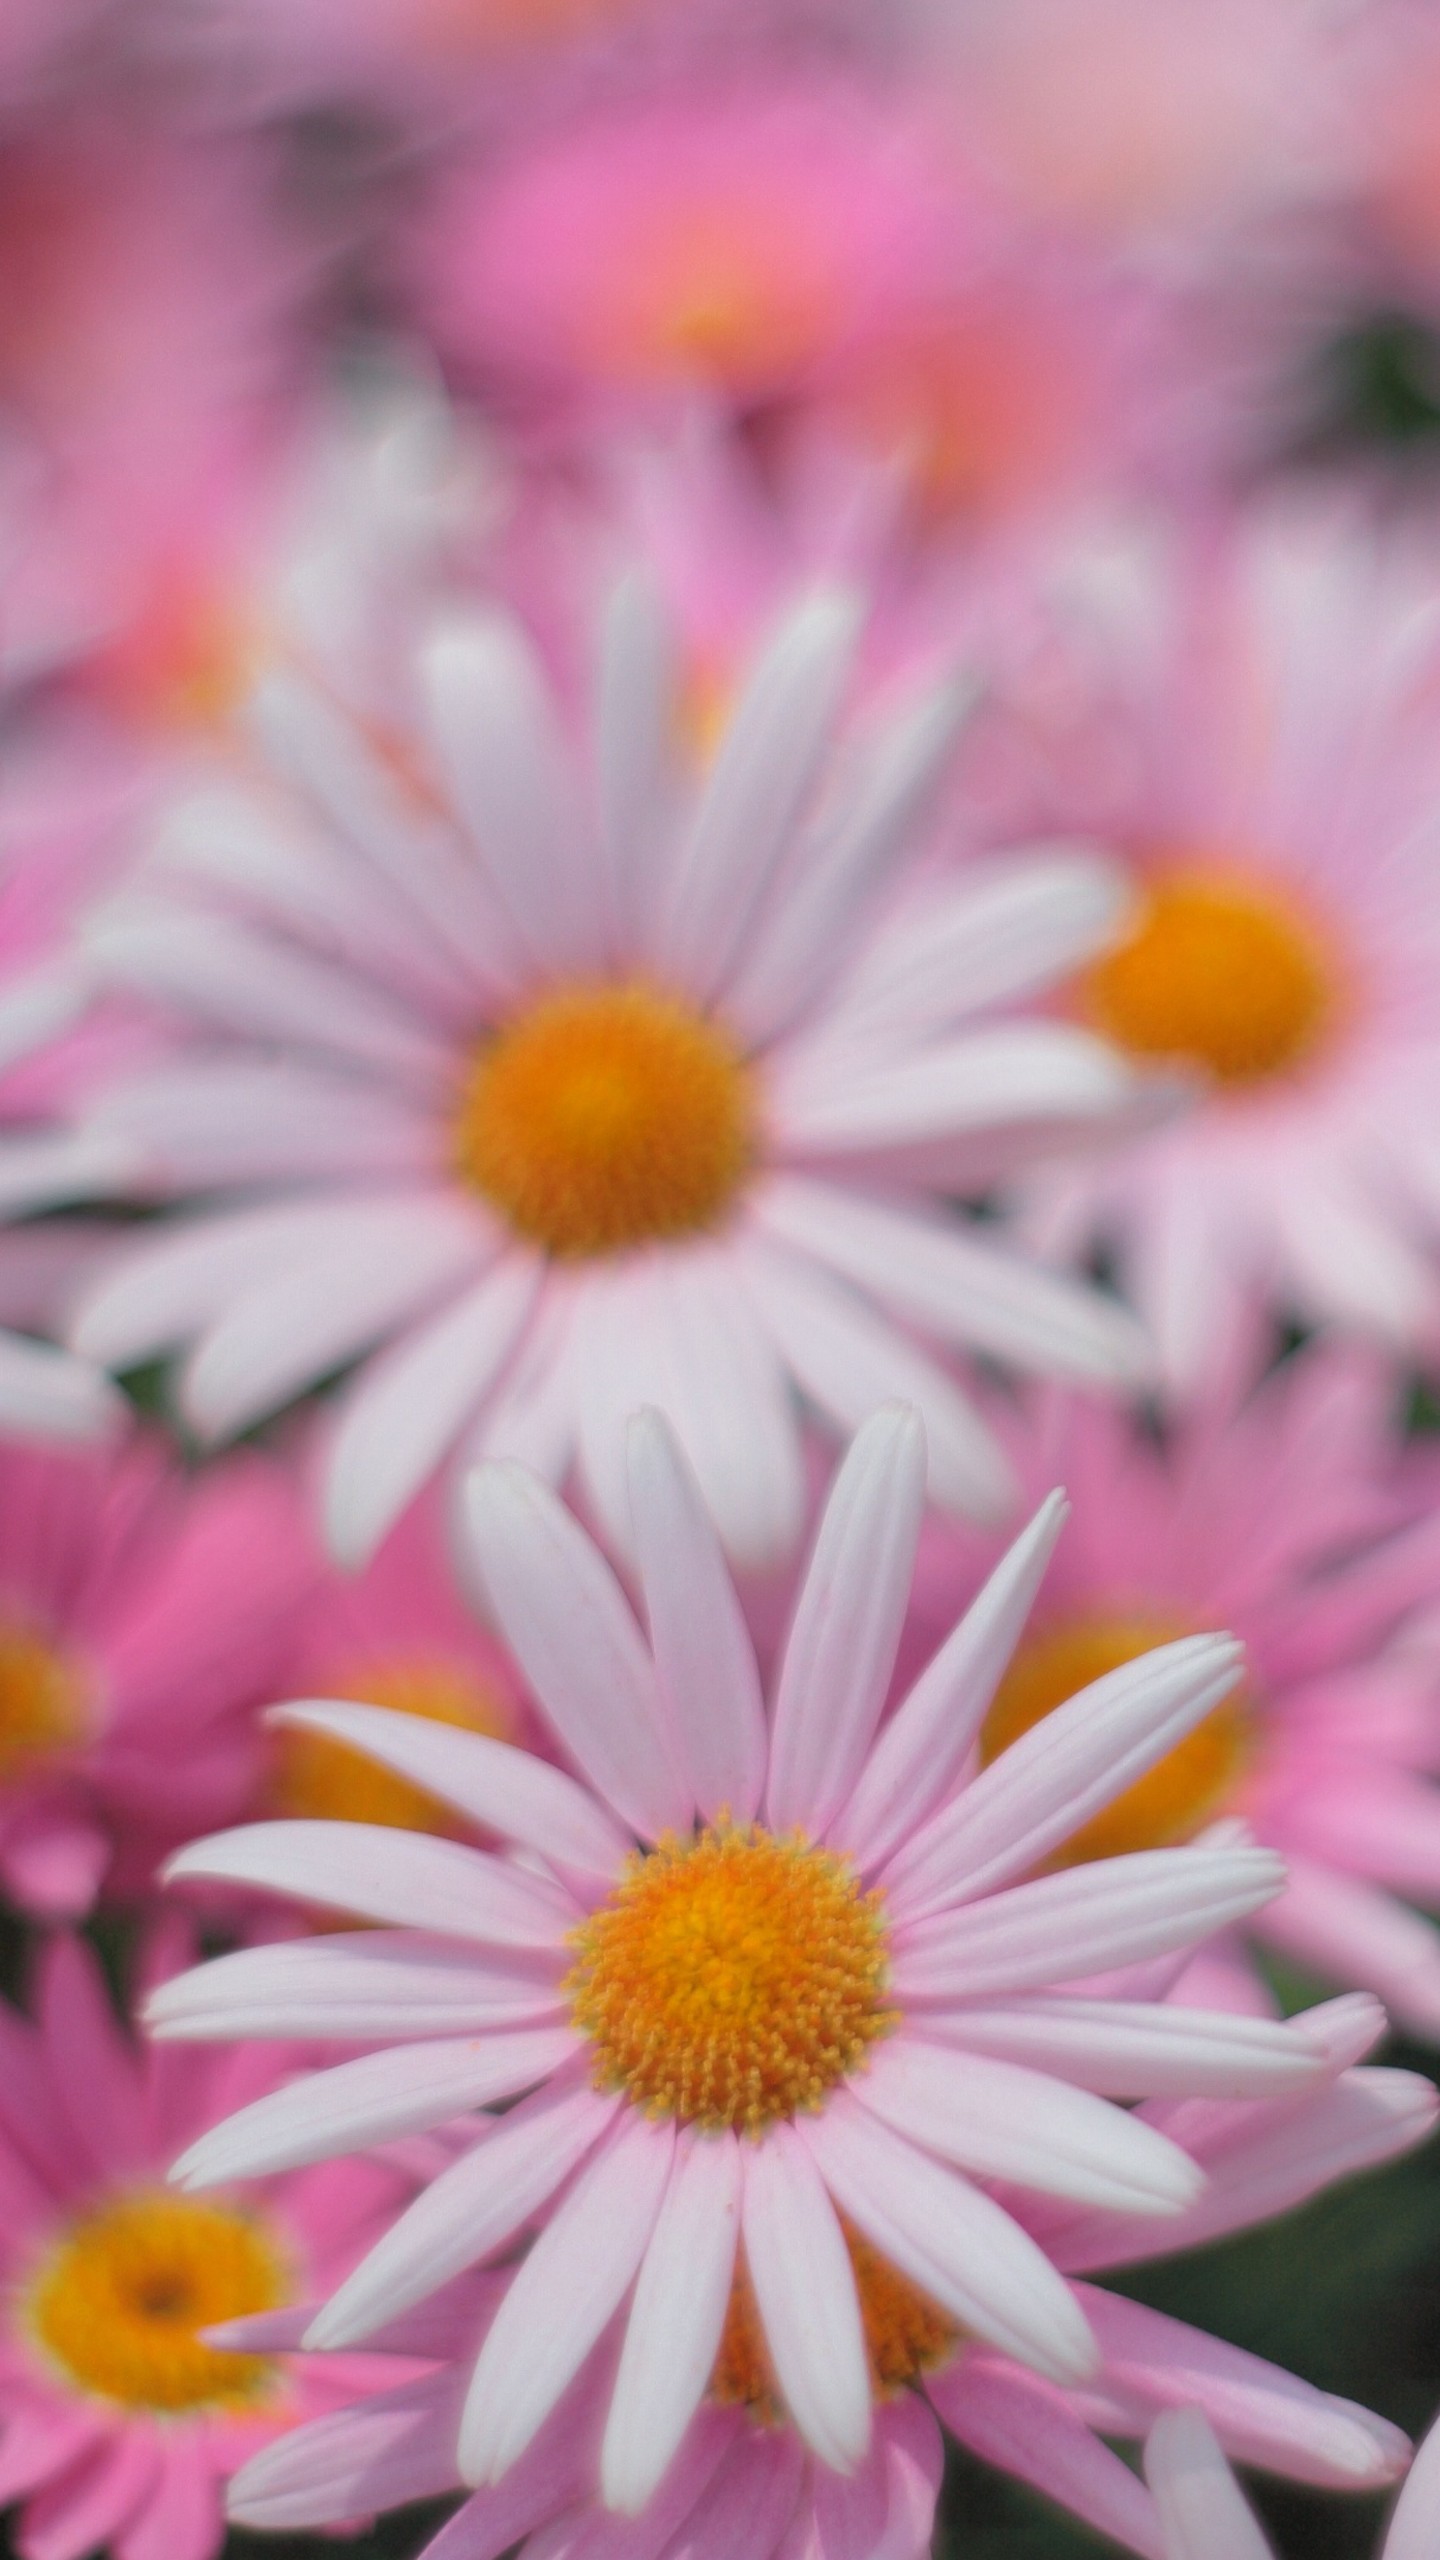 A close up of some pink and white flowers - Daisy